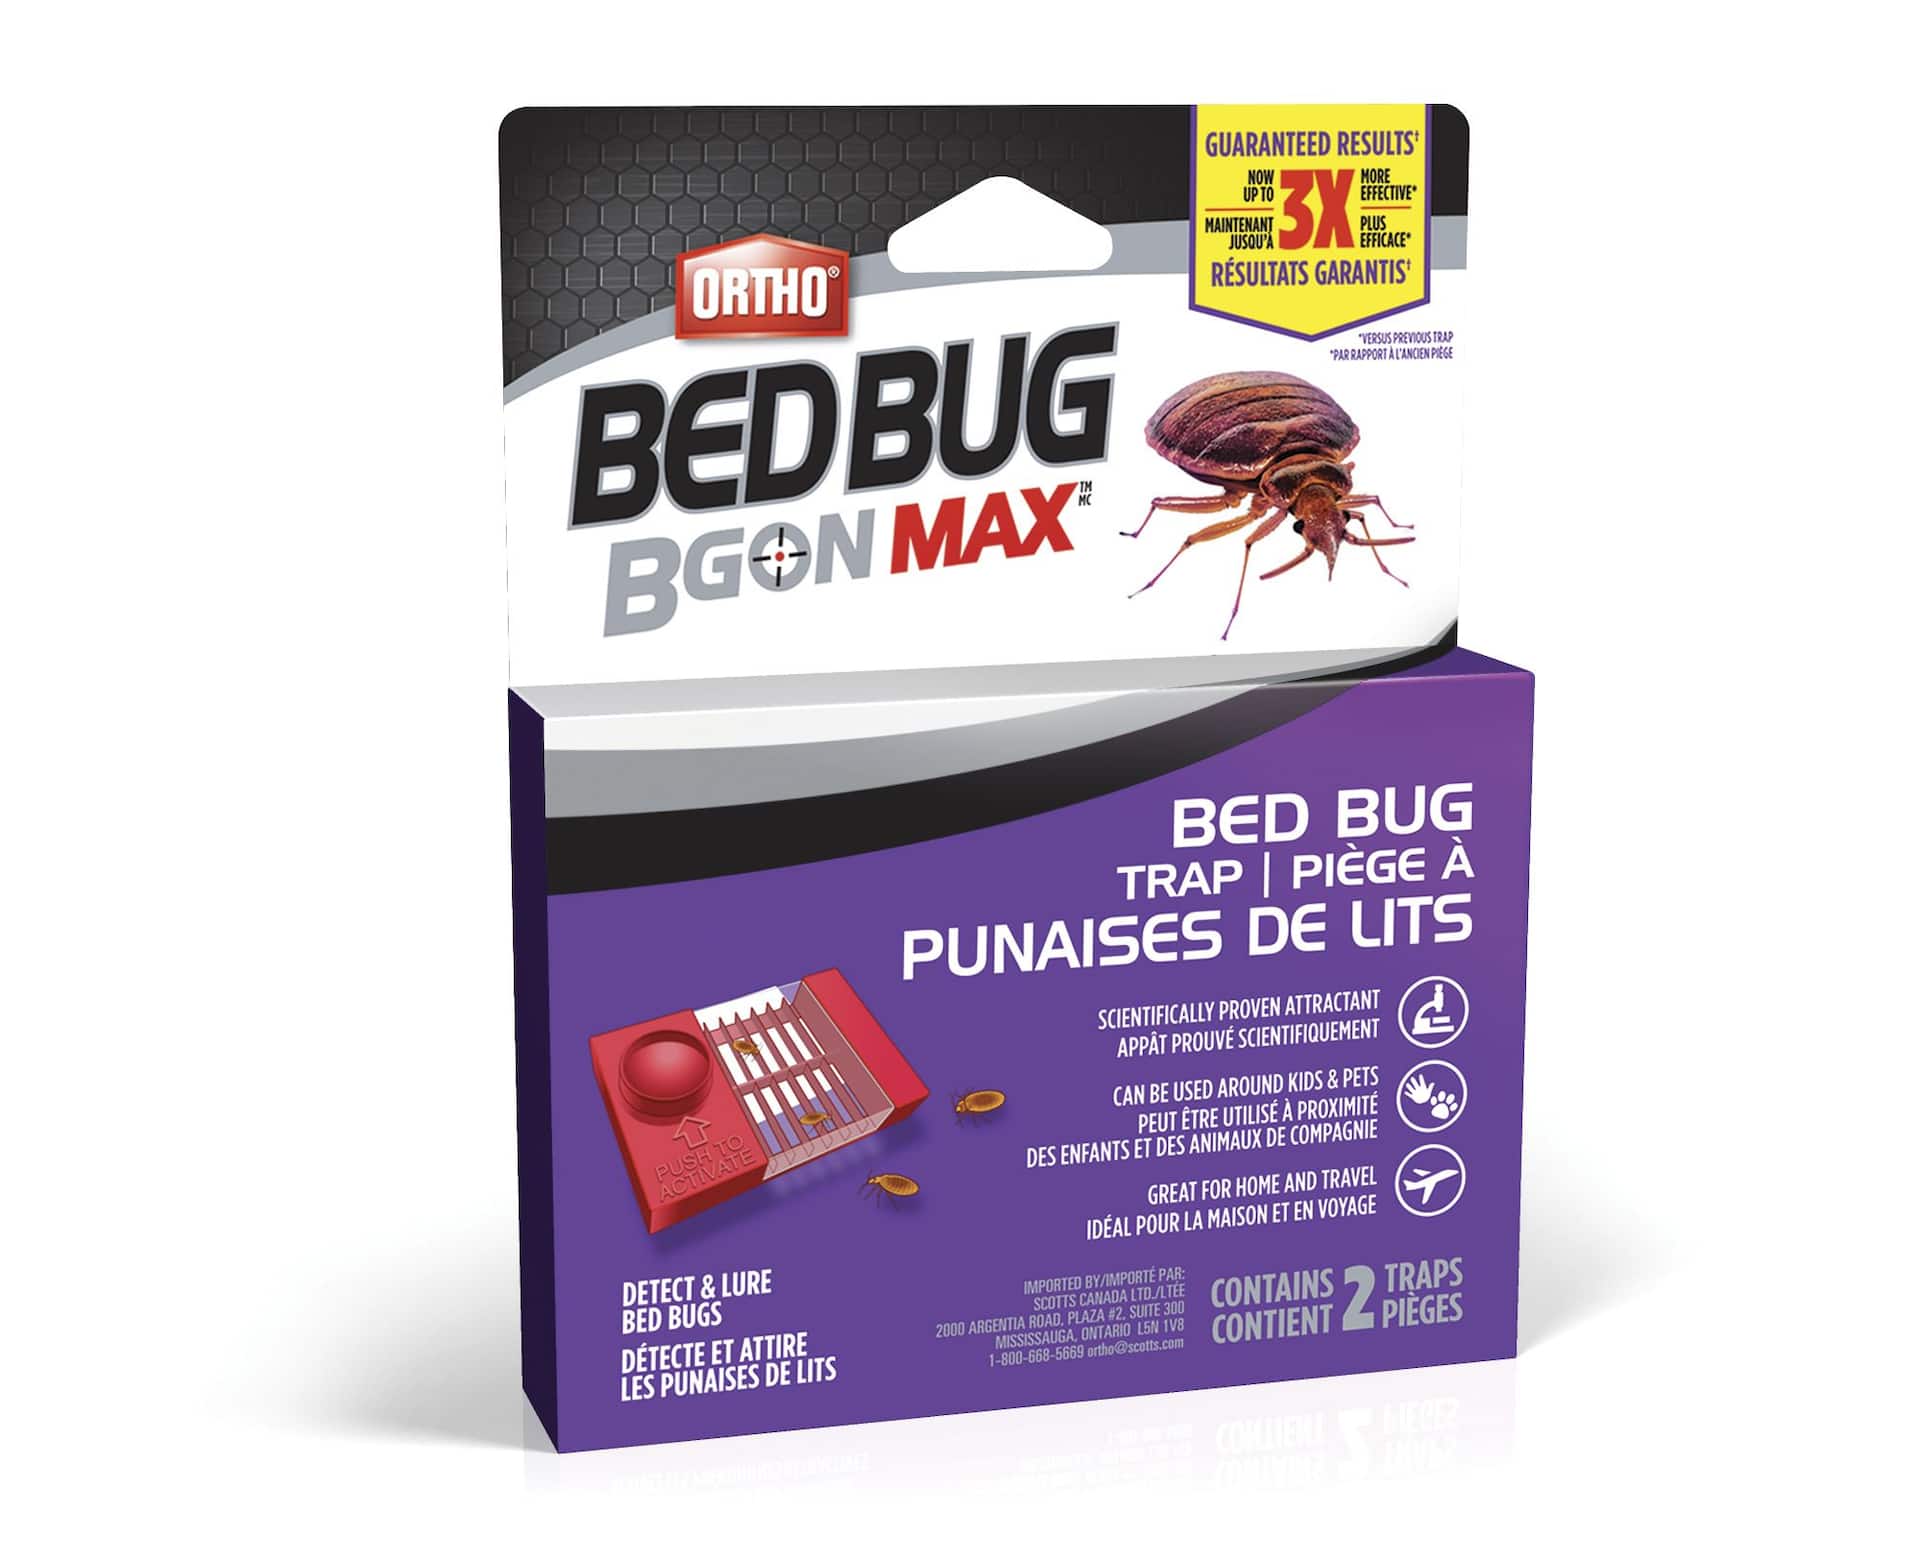 Home Defense Max Bed Bug Trap (2-Pack)